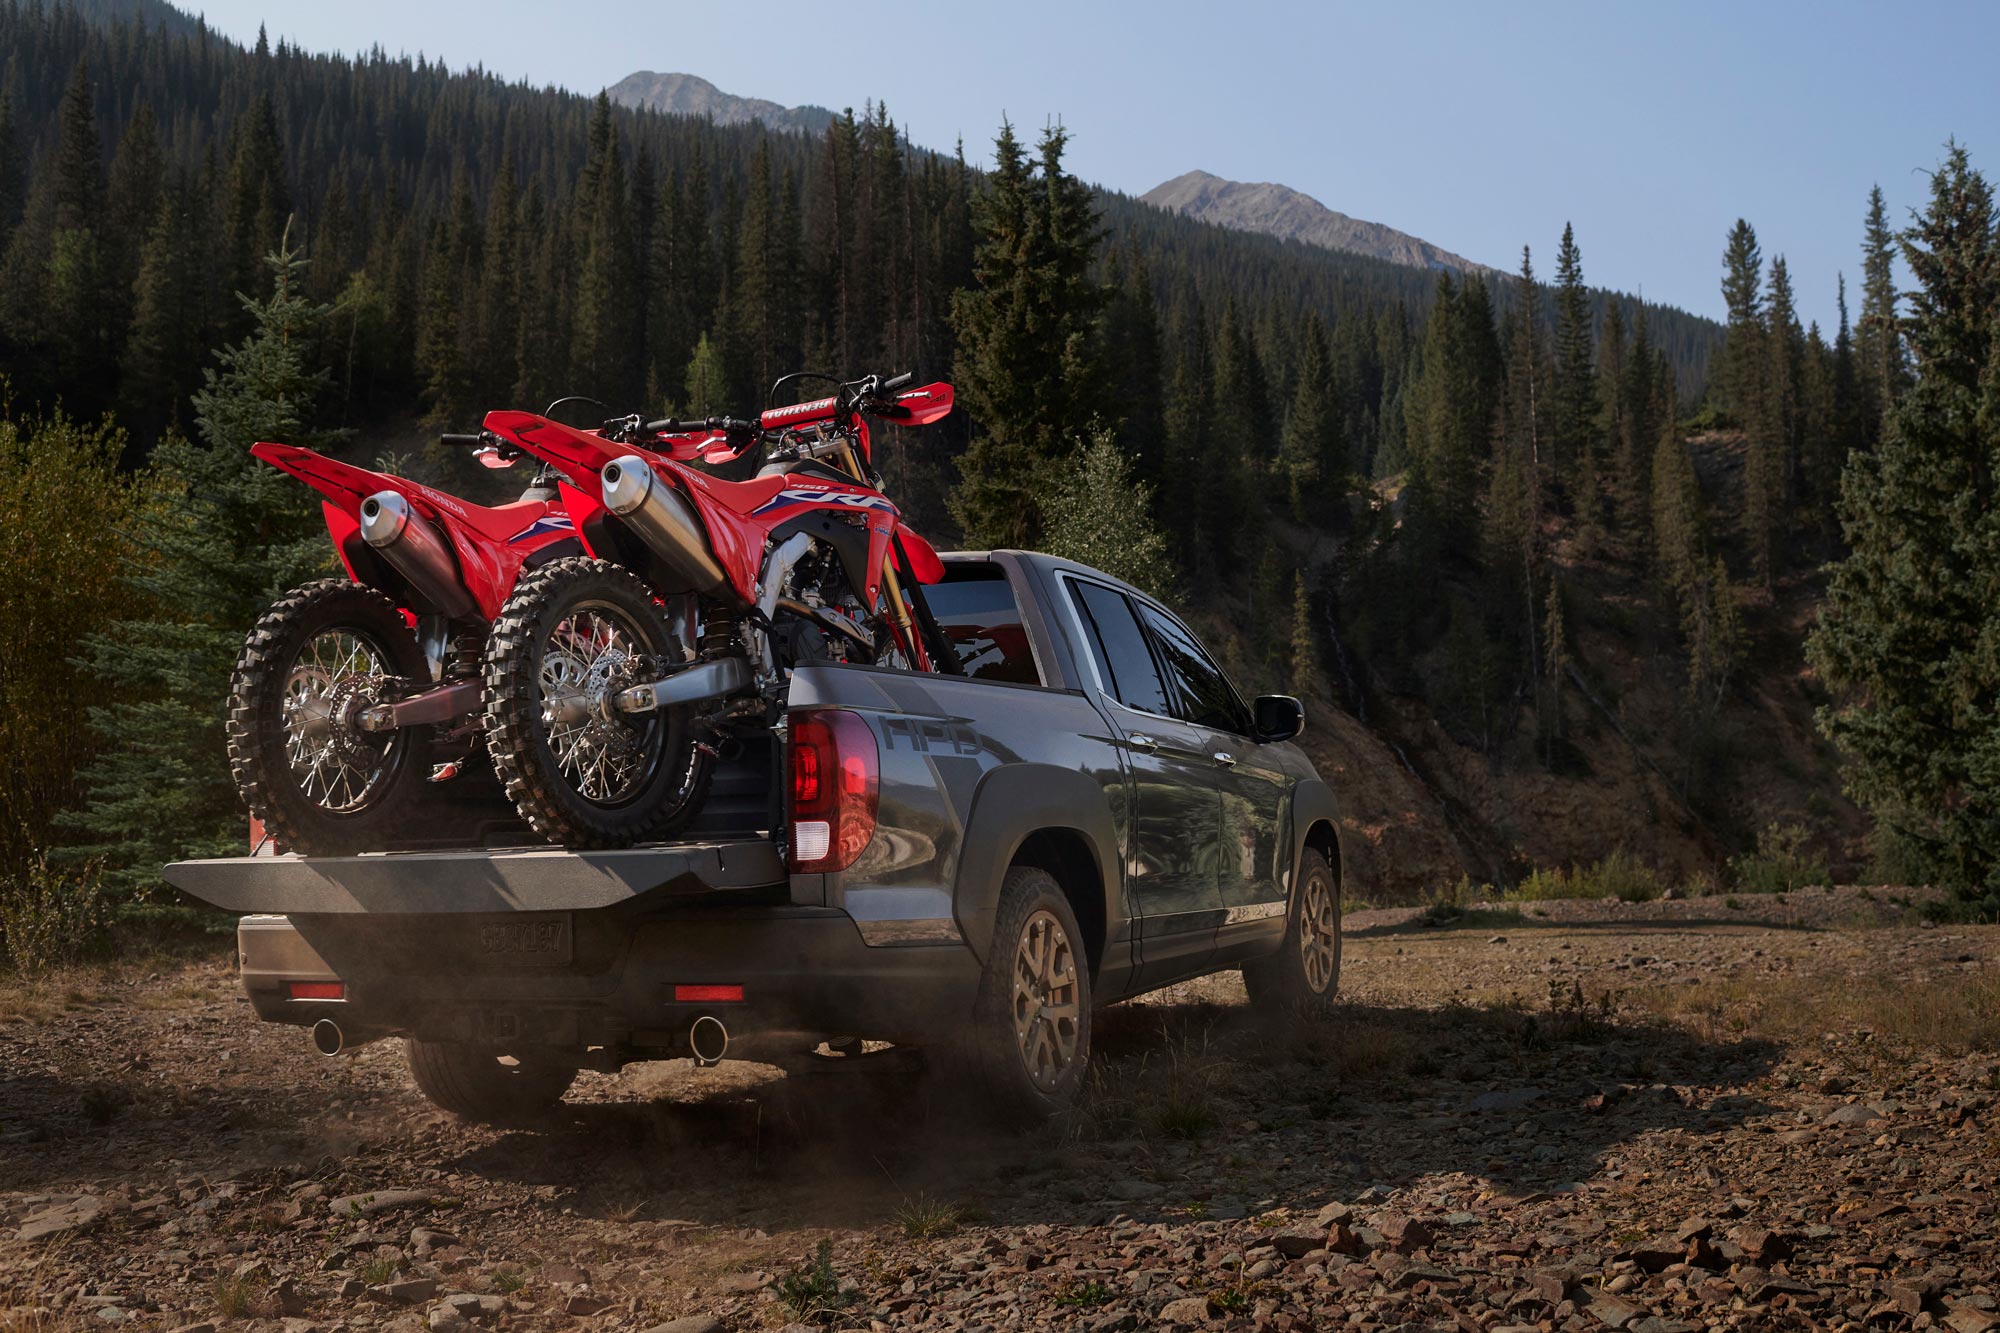 Honda Ridgeline driving off-road with two motorcycles in bed.